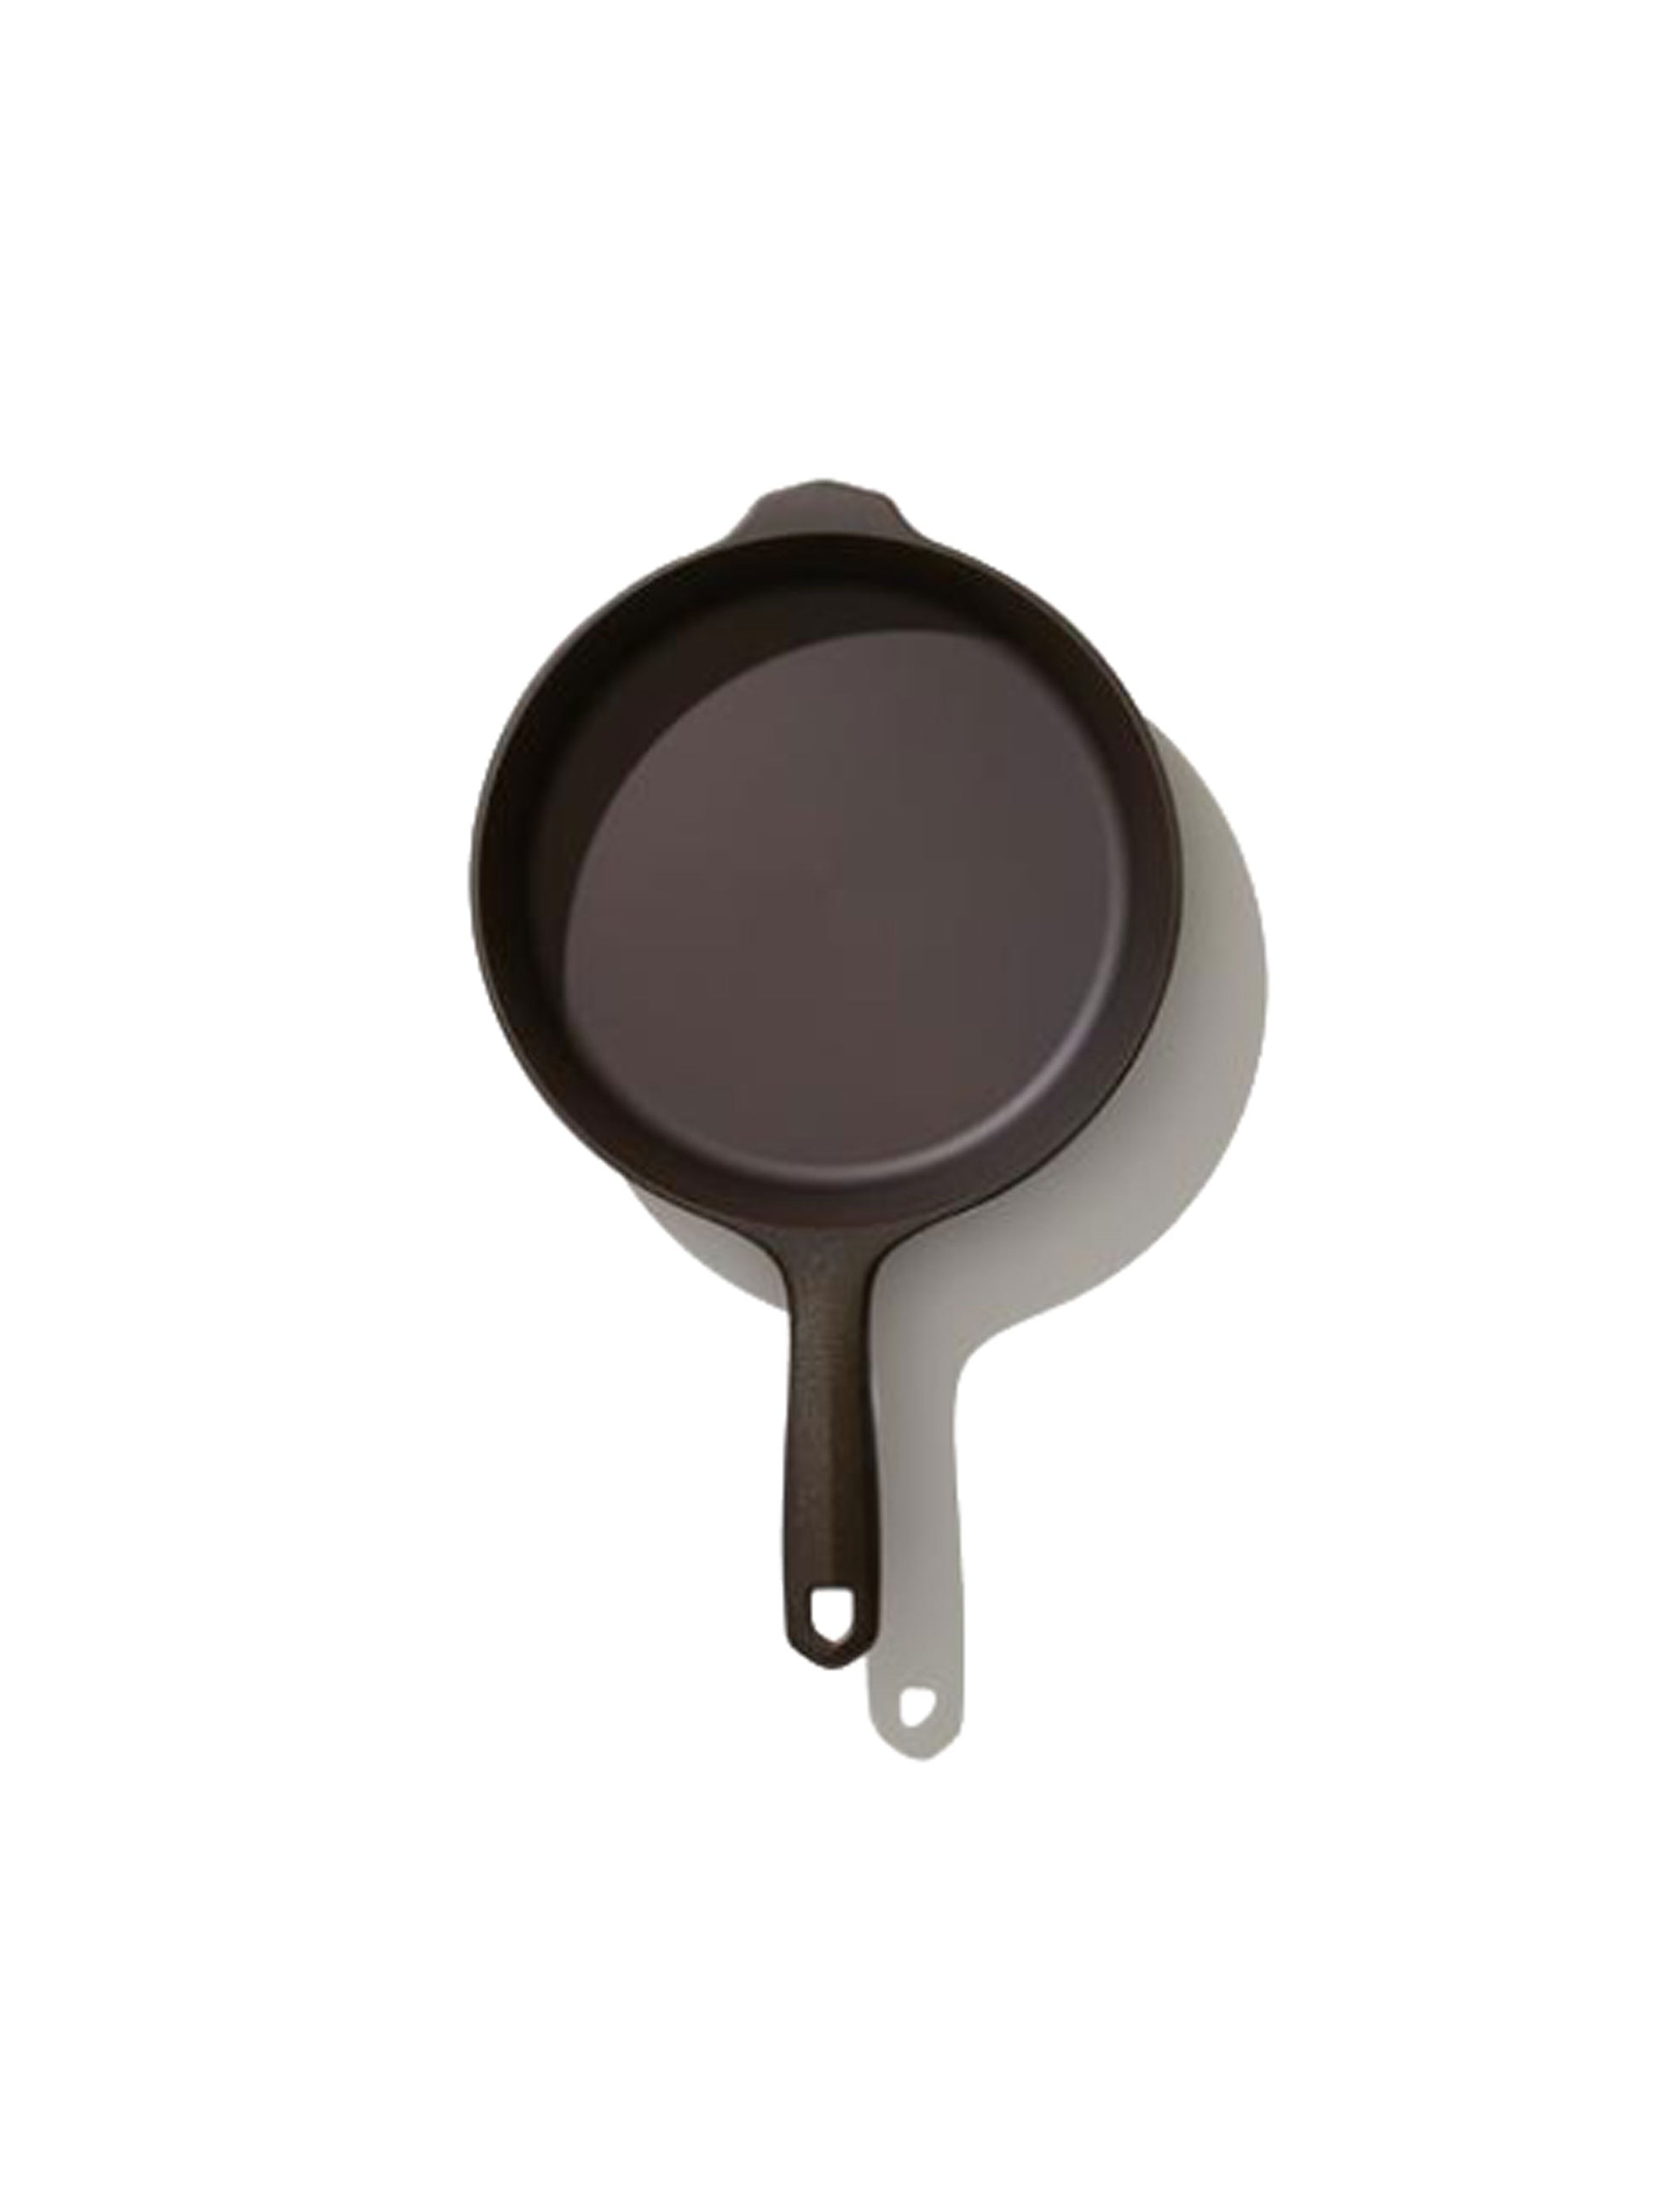 Field Company 10.25 in. Cast Iron Skillet & Lid Set (No. 8)